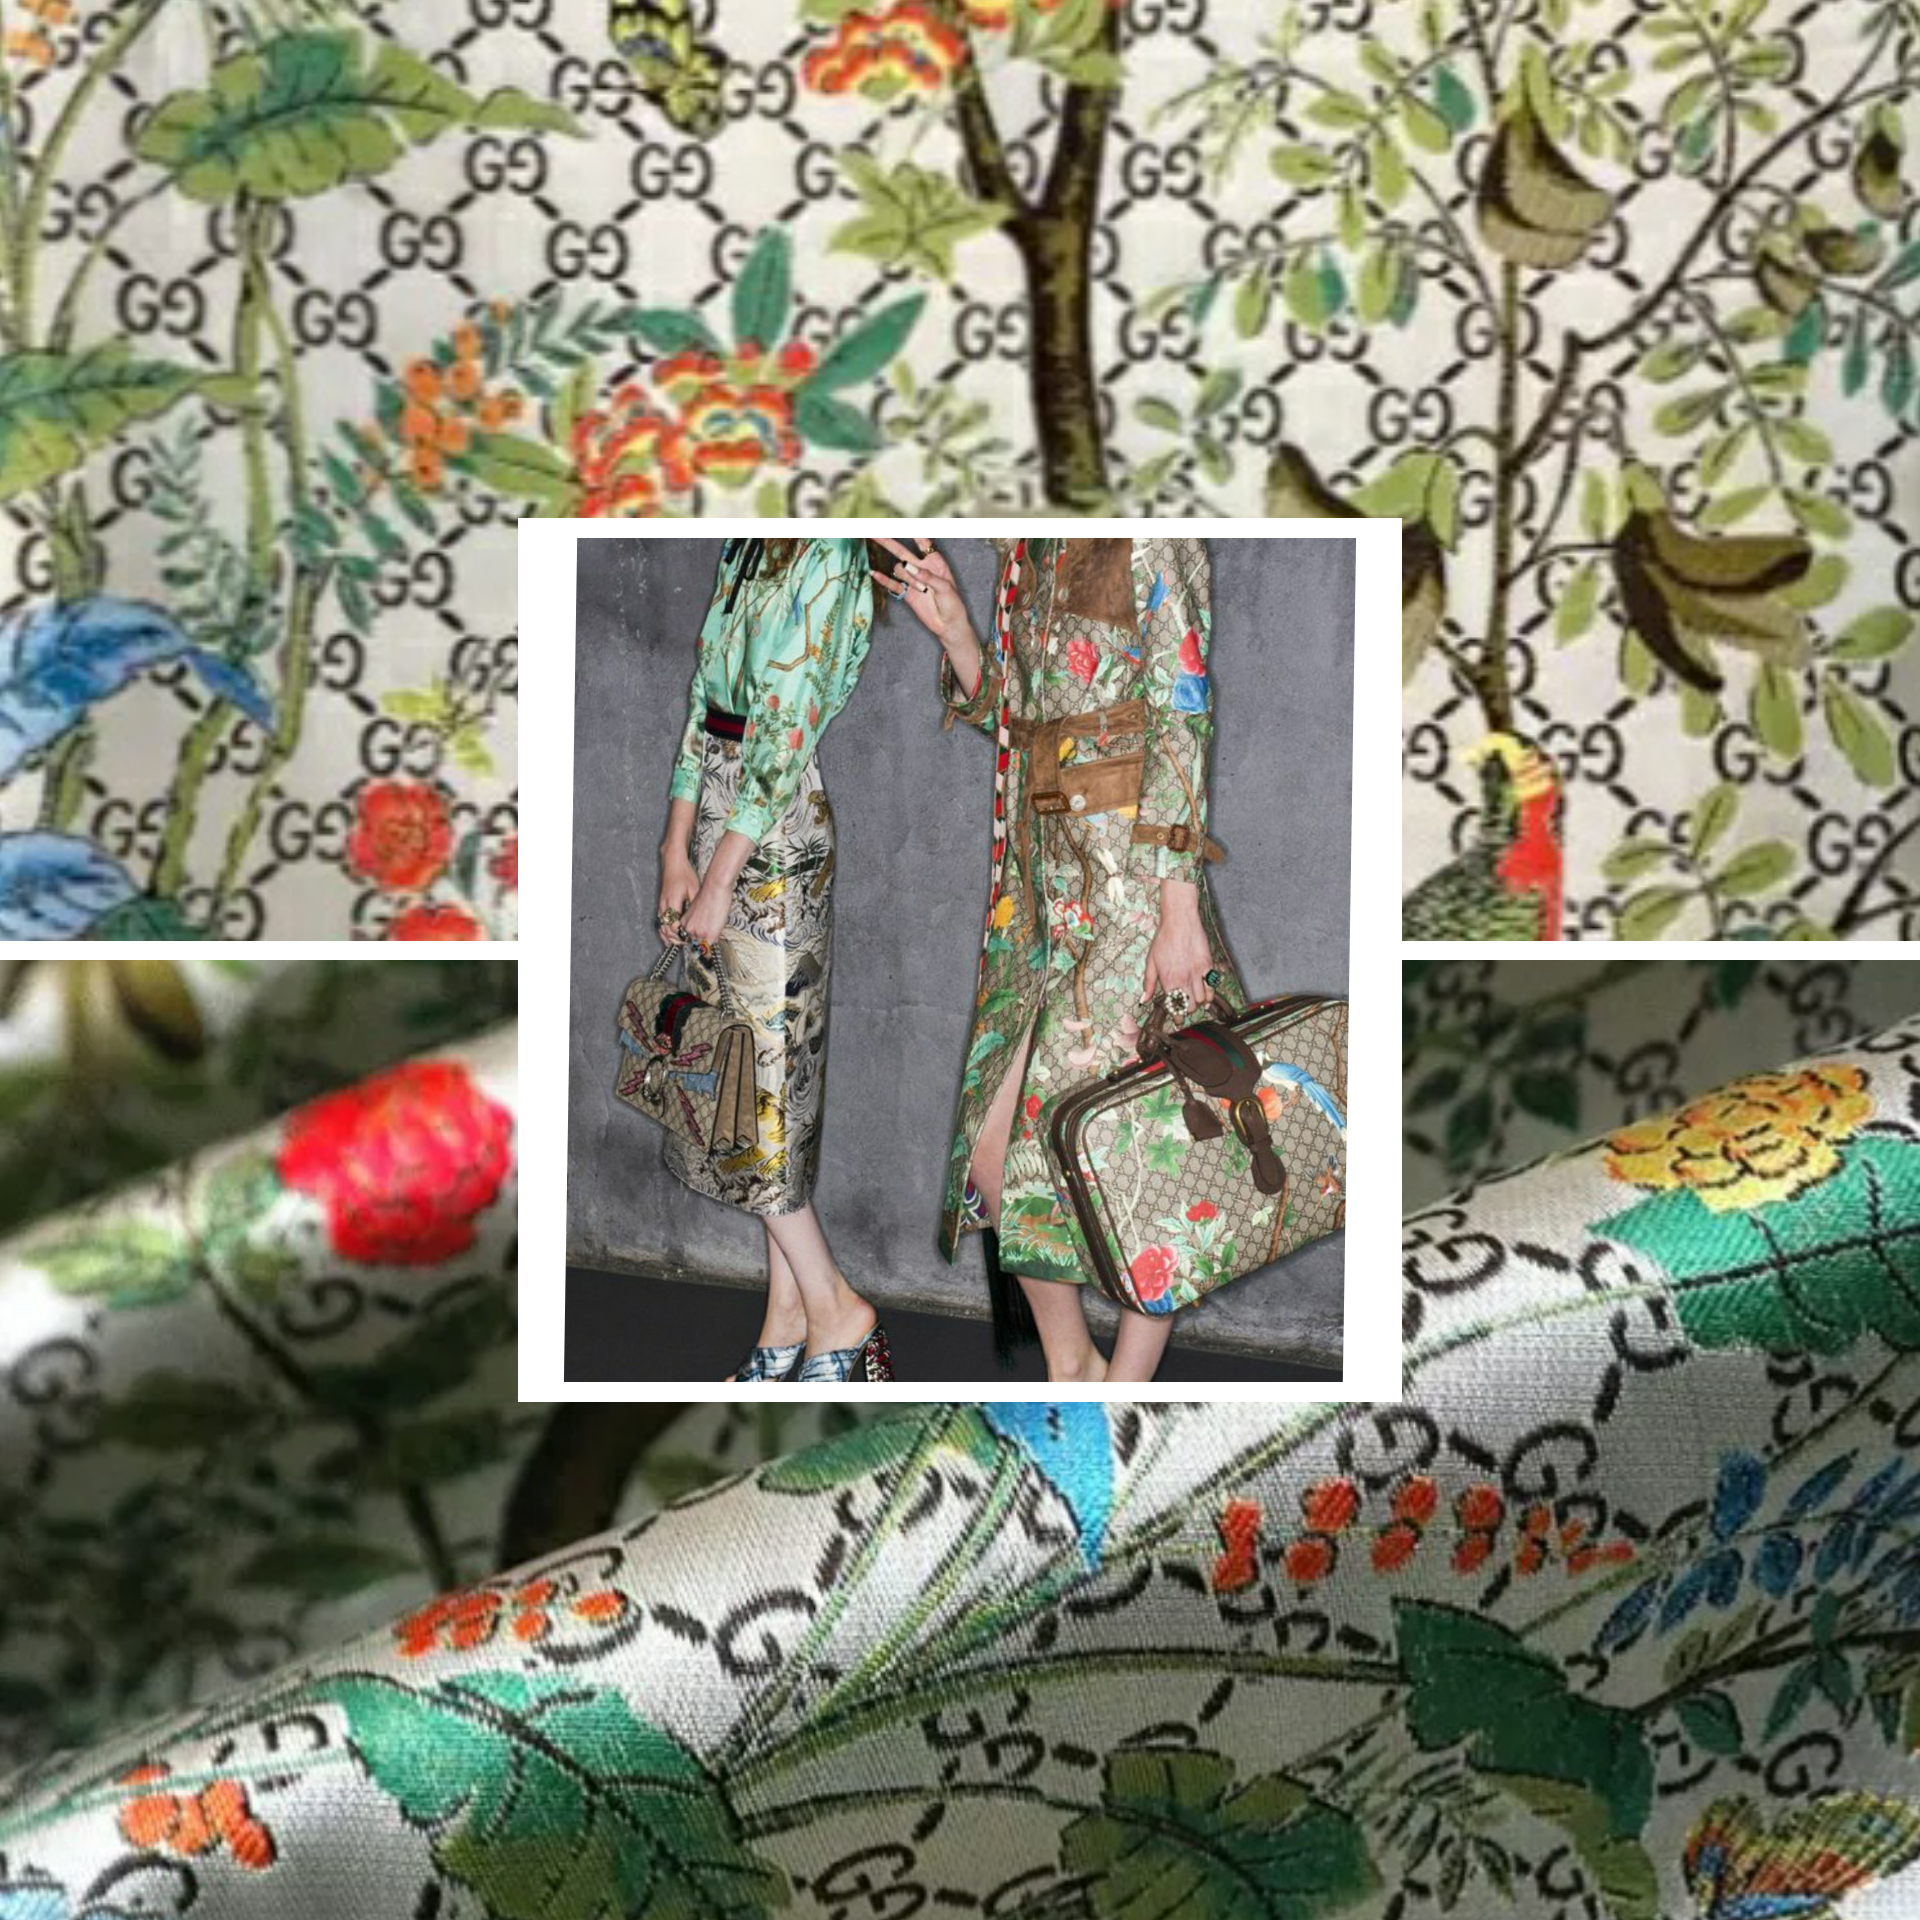 gucci floral fabric